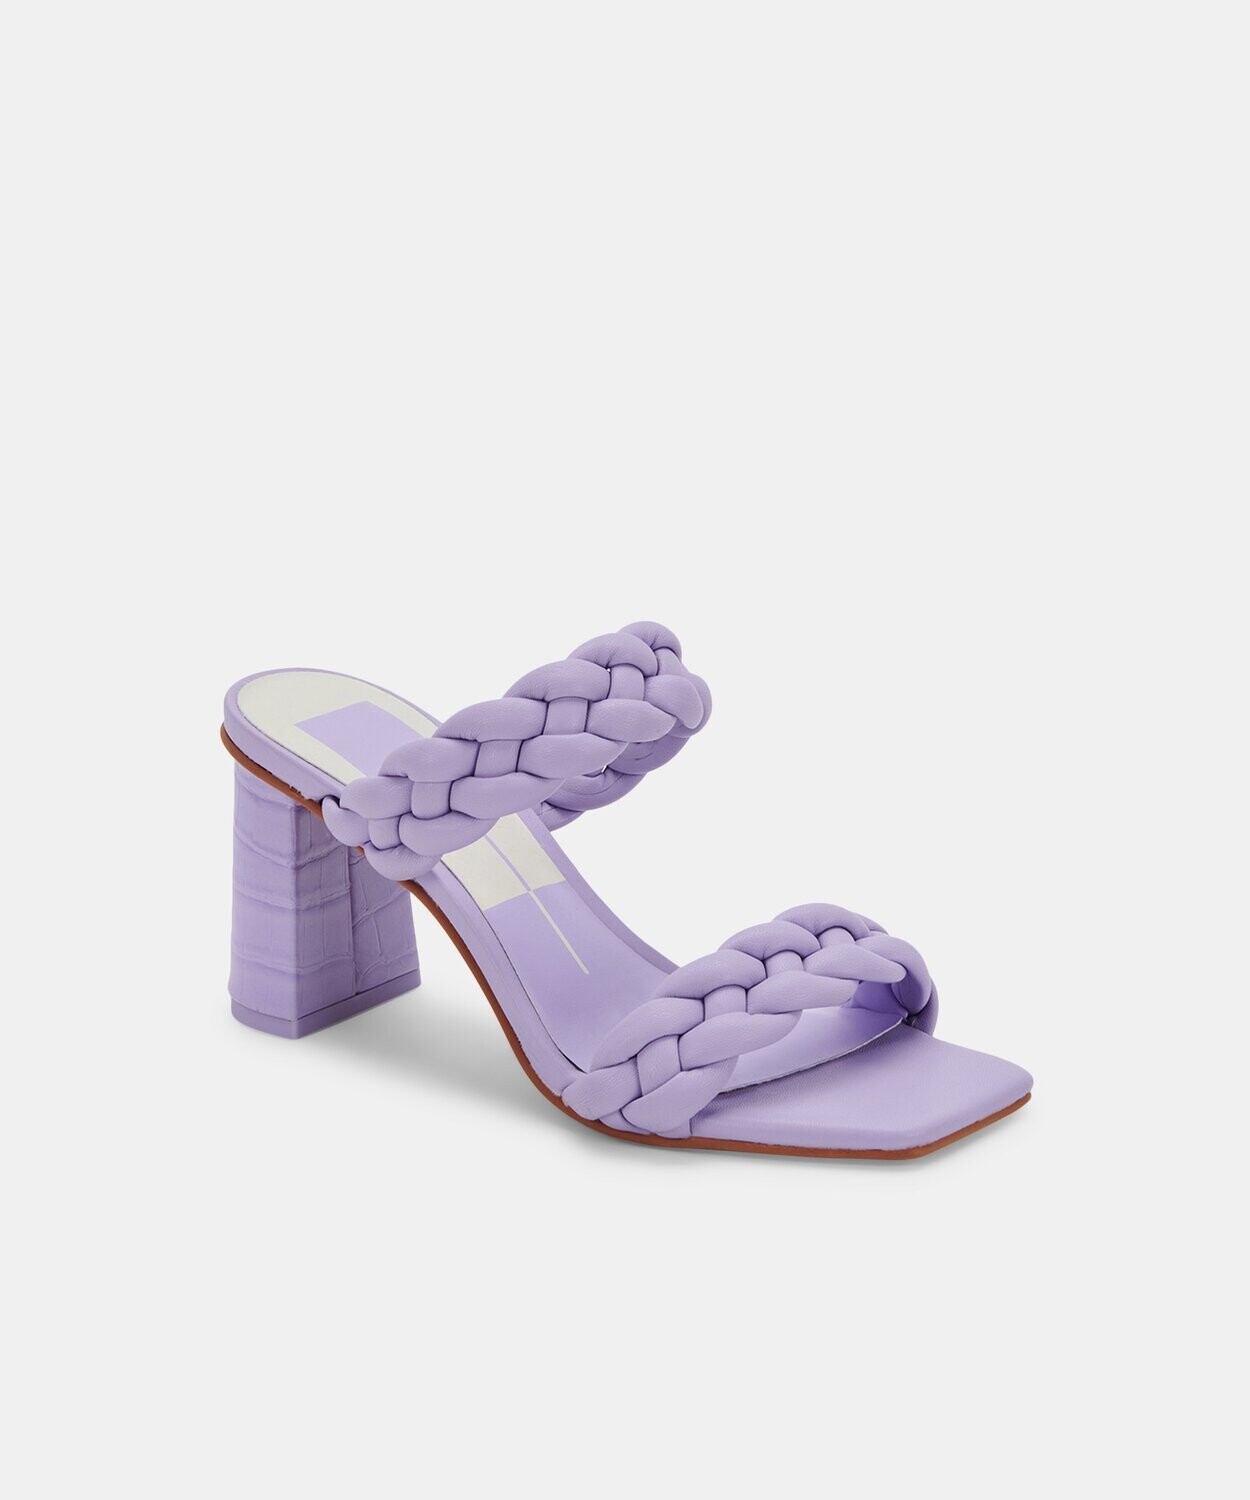 Dolce Vita Paily Heels in Lavender